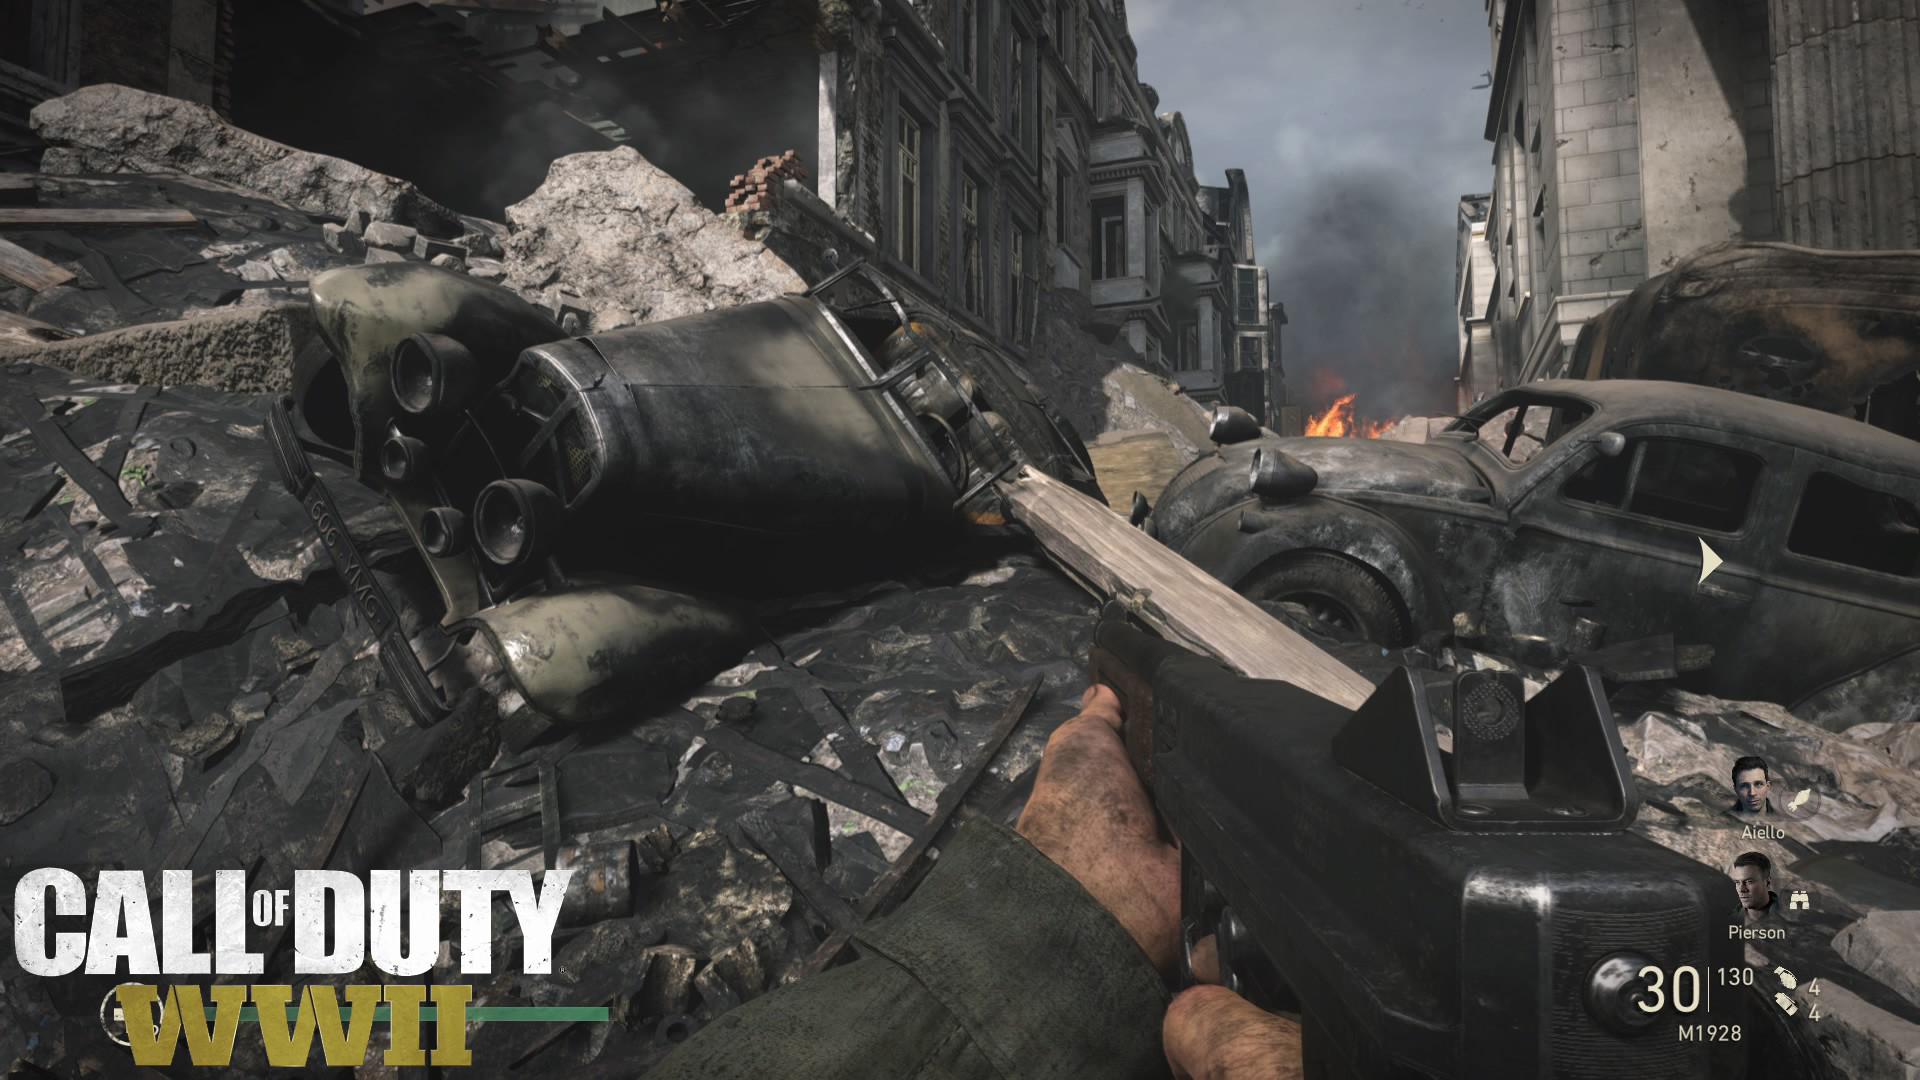 ConsoleTuner » Call of Duty WWII